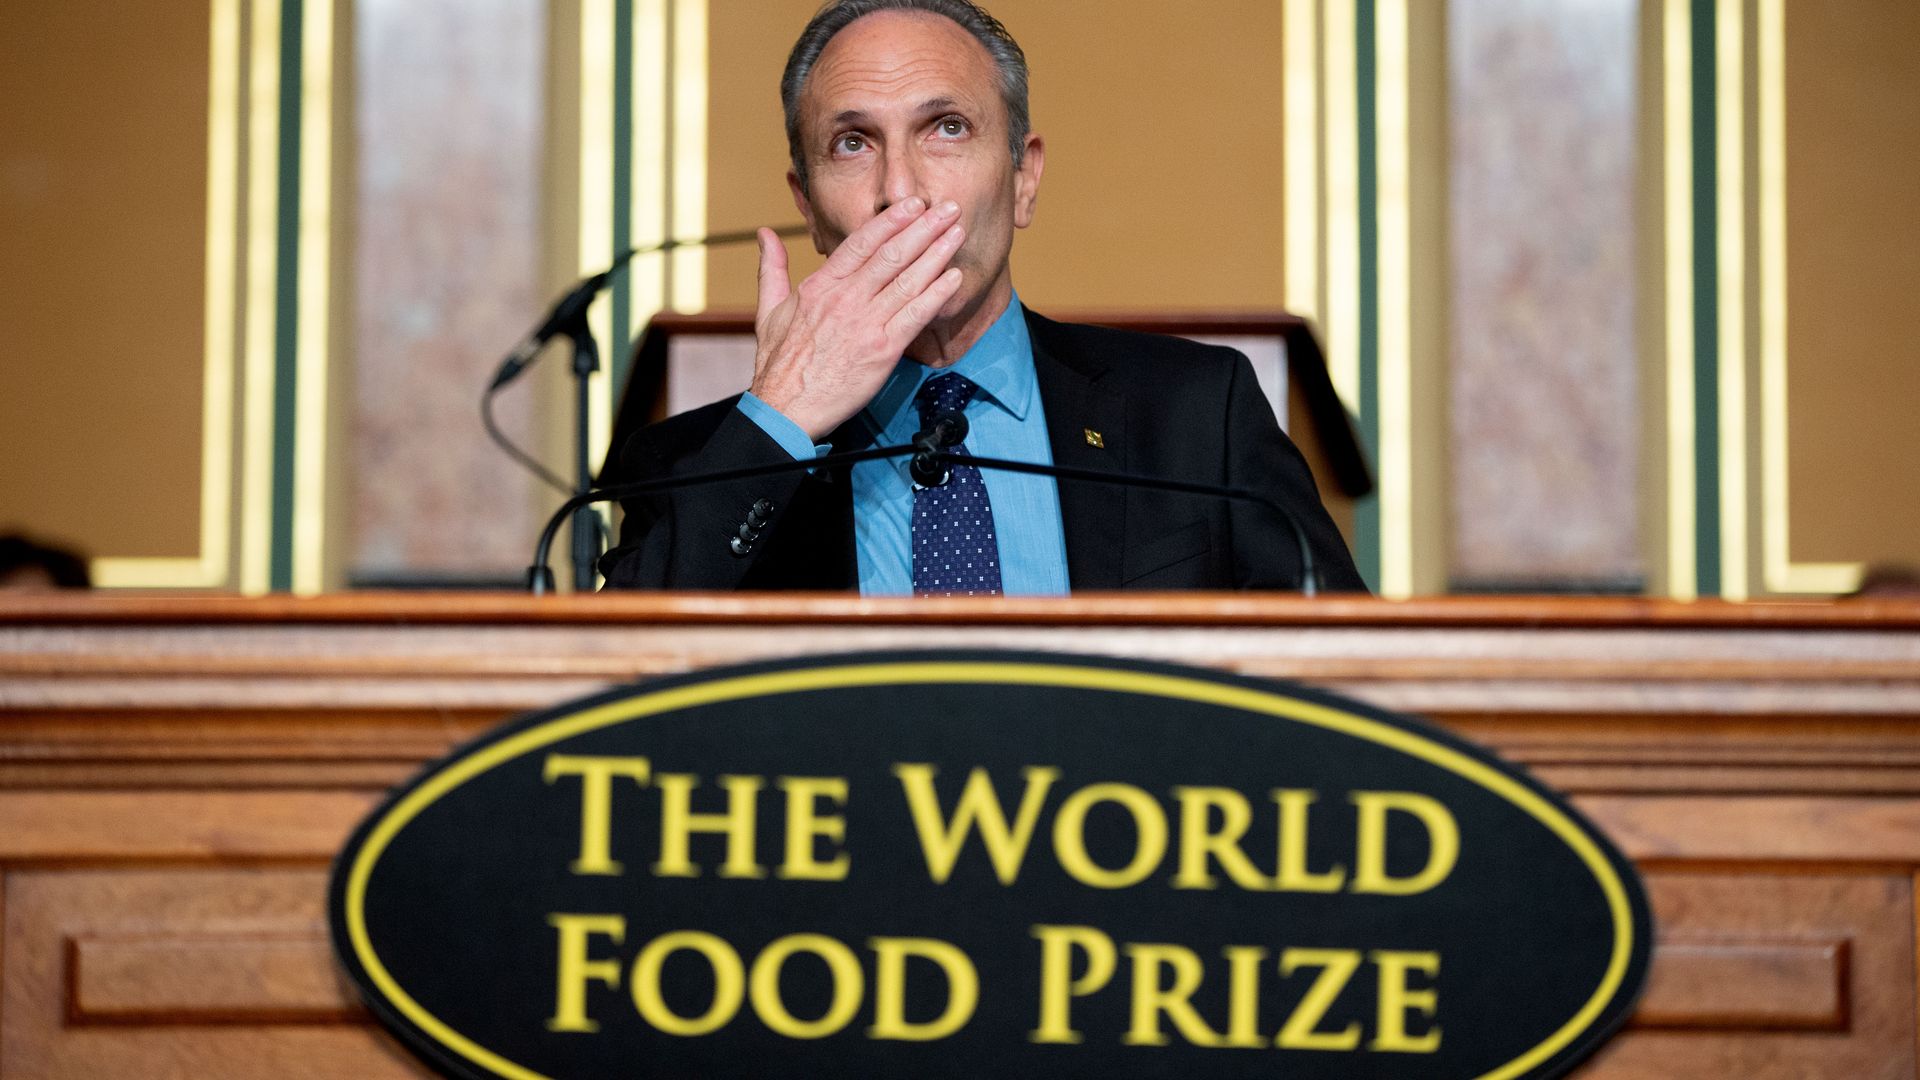 A photo of a World Food Prize recipient.